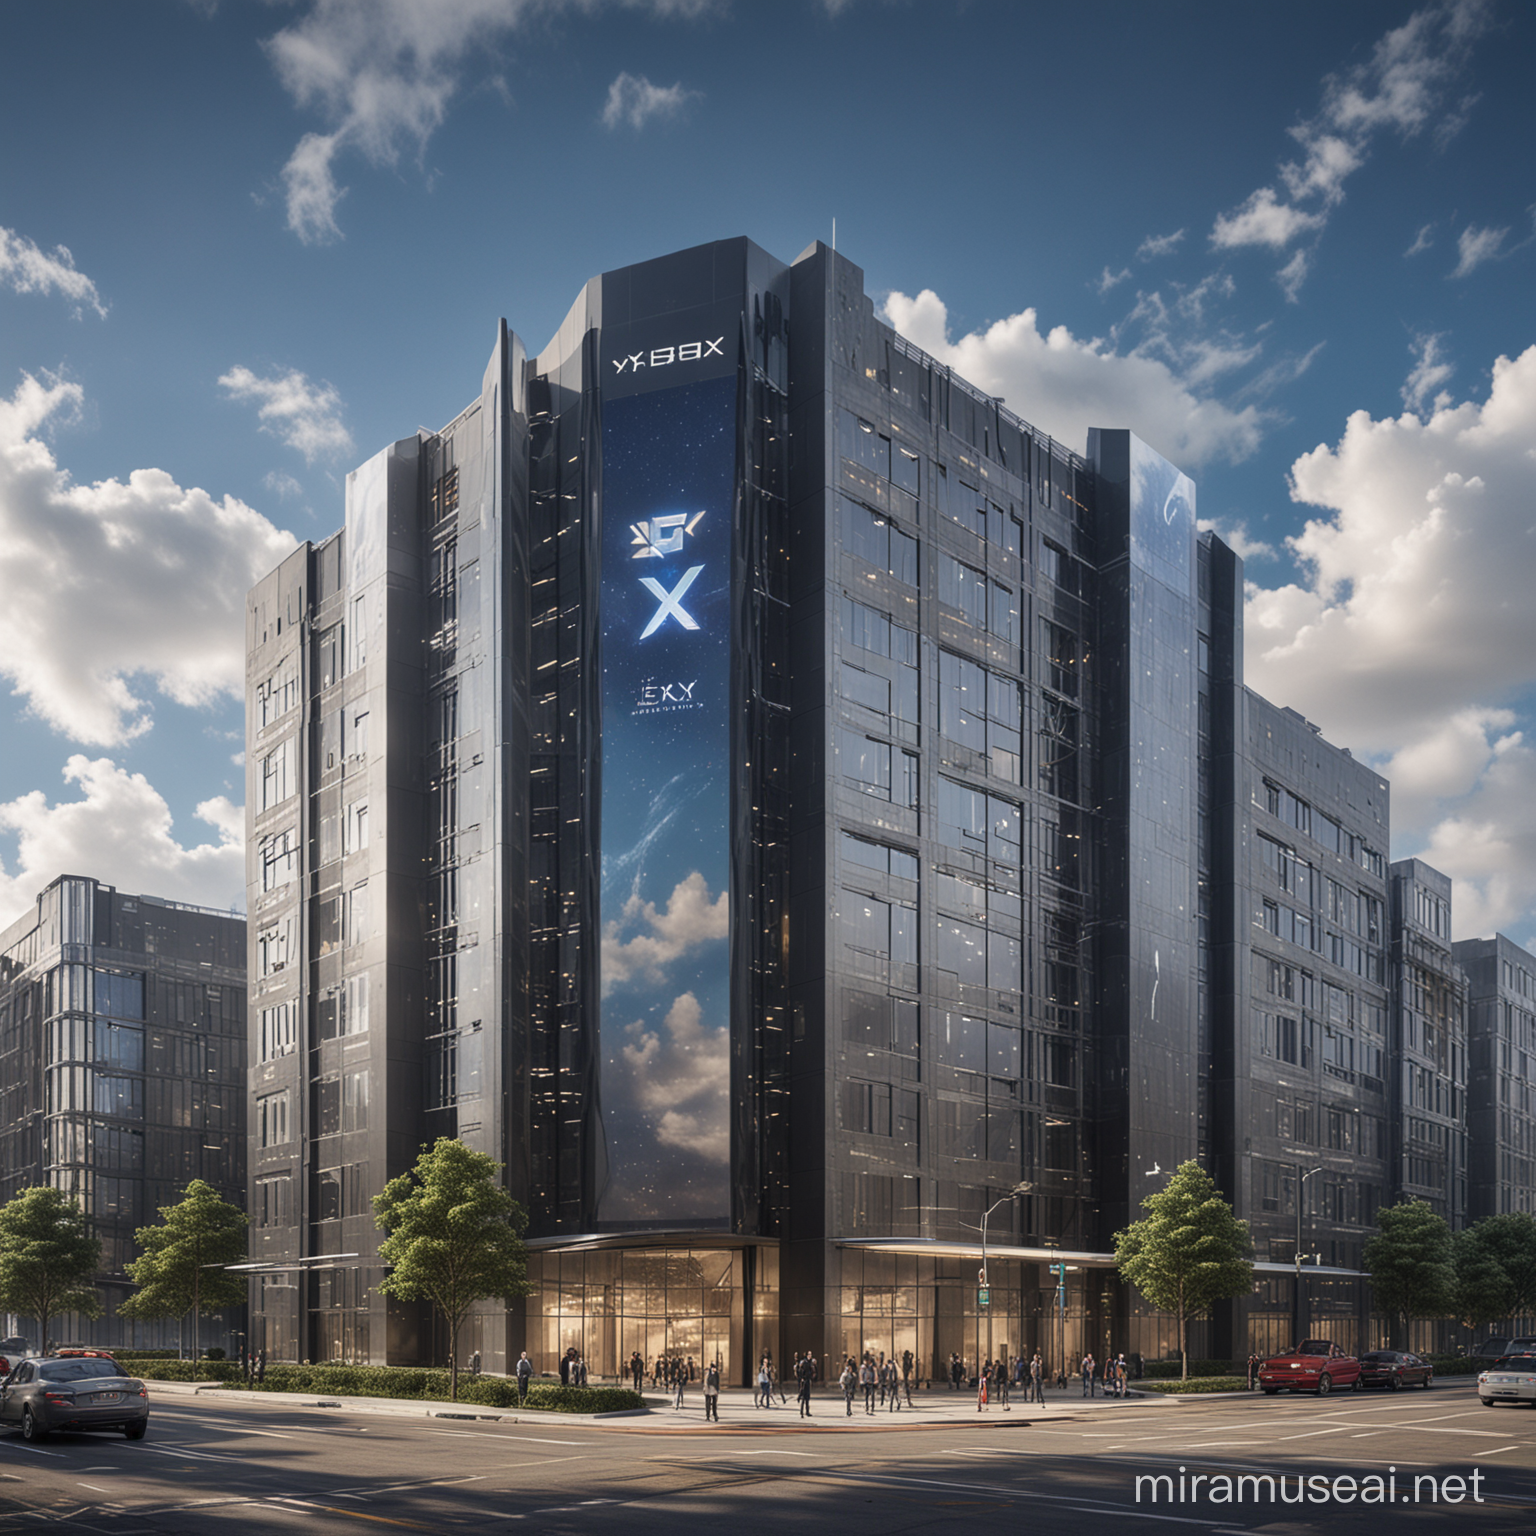 make big apartment of space x company building , with sky and their logo ,ad full space so I can make it tranpsirnet